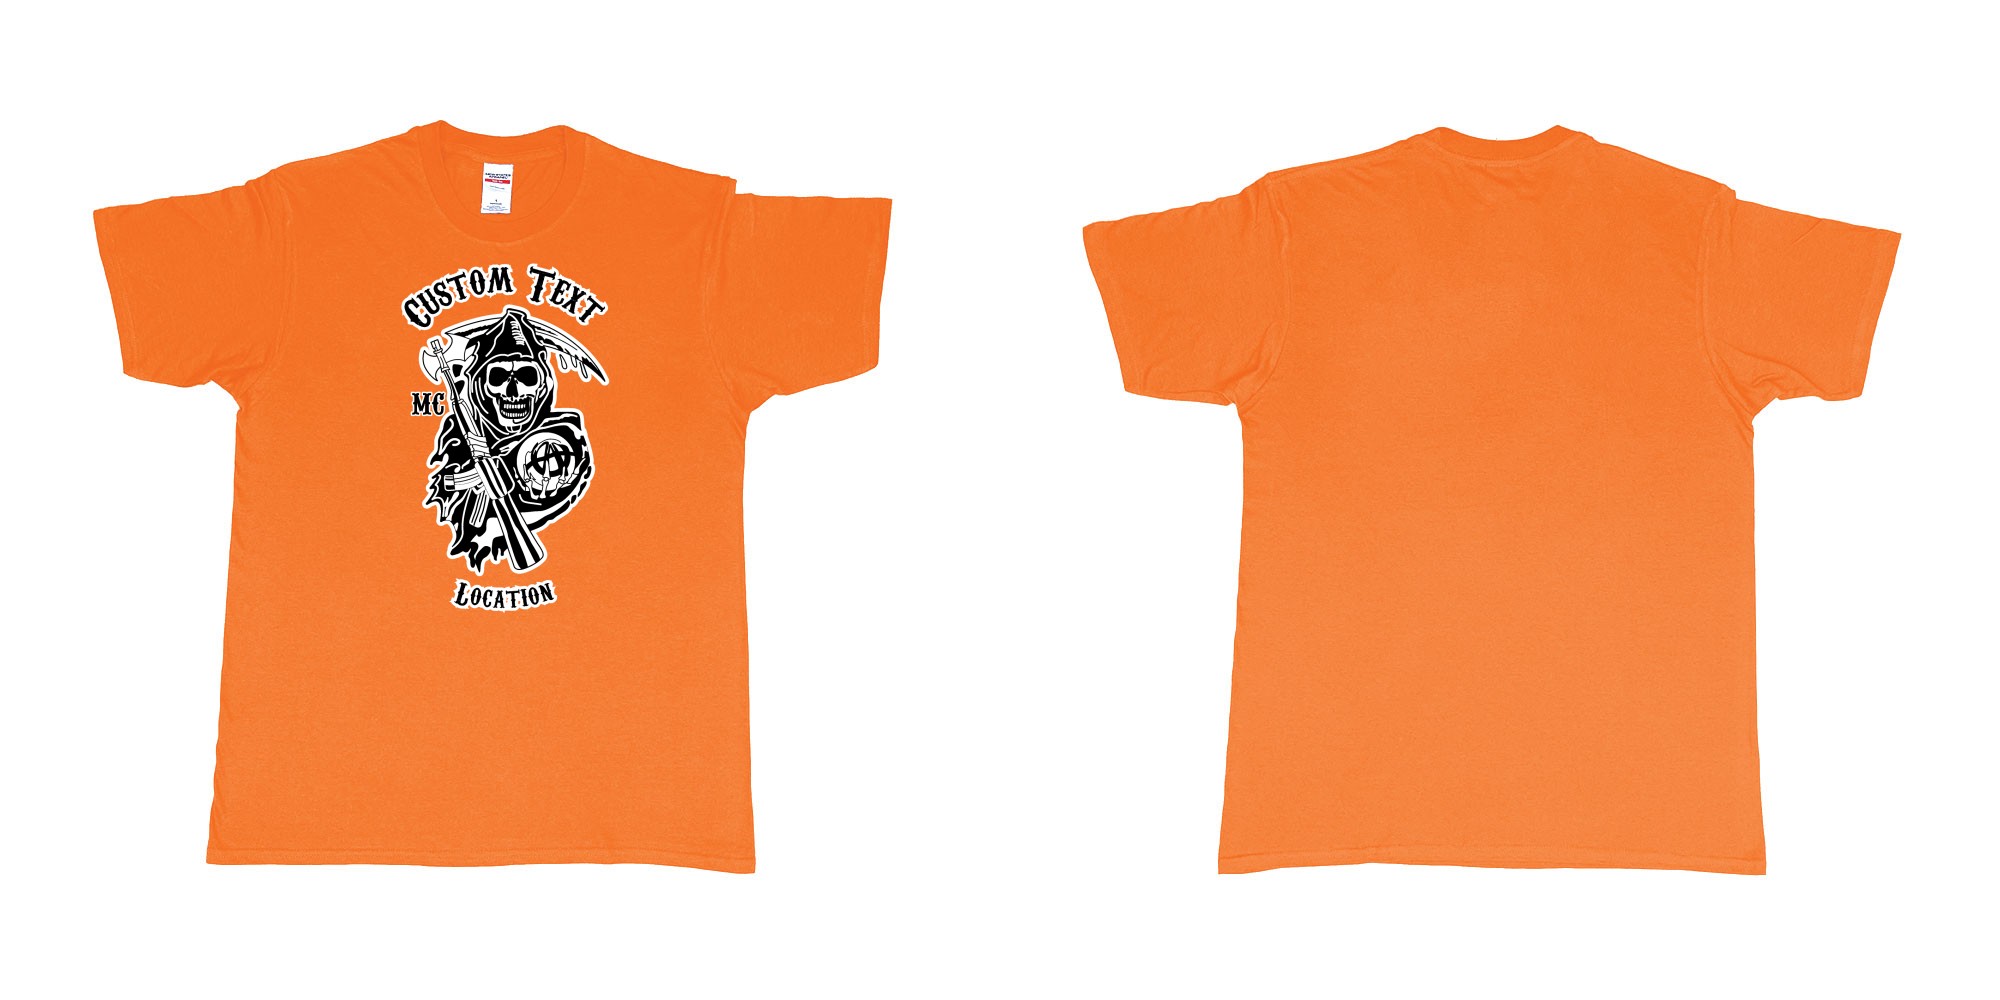 Custom tshirt design son of anarchy logo custom text in fabric color orange choice your own text made in Bali by The Pirate Way